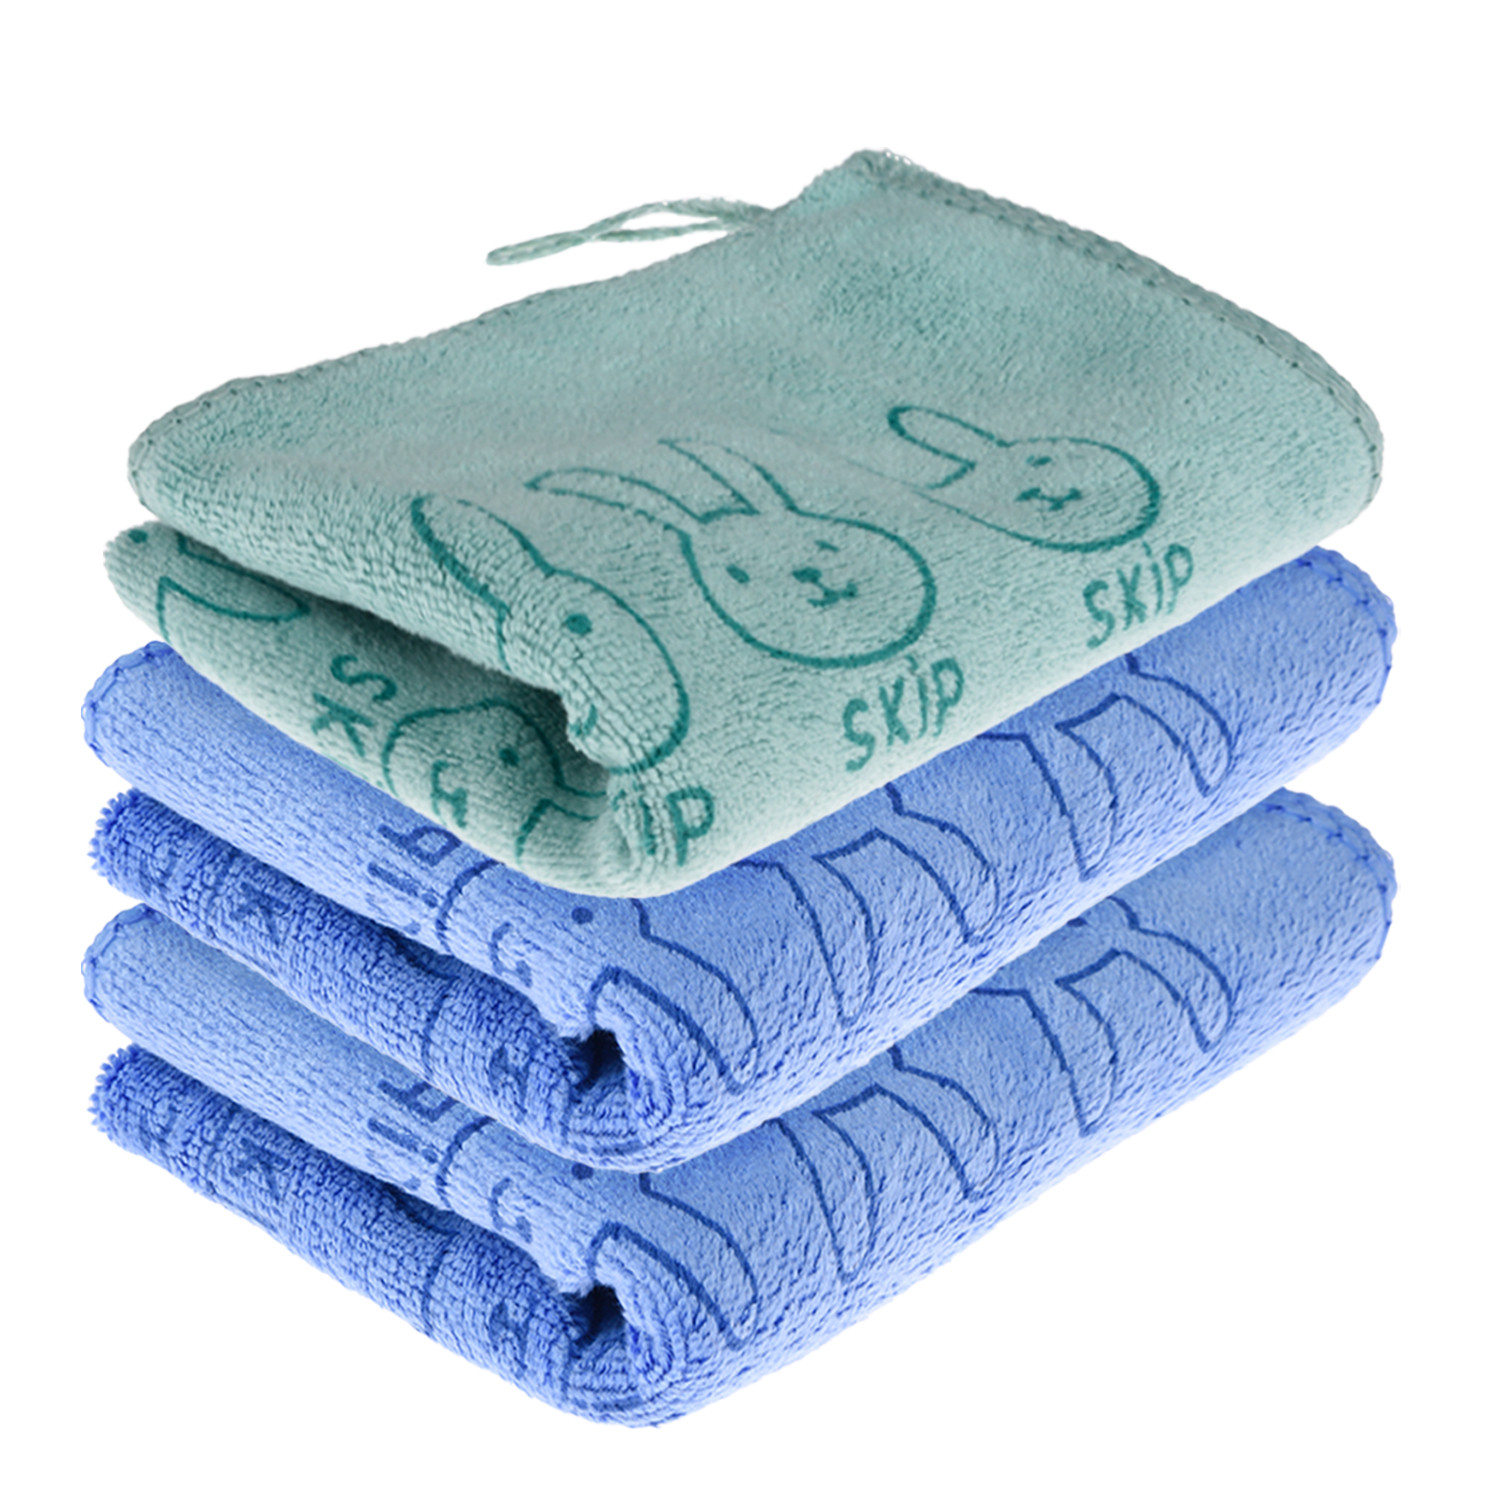 Kuber Industries Cleaning Towel | Reusable Cleaning Towel for Baby | Duster Towel for Home Cleaning | Skip Cleaning Cloth Towel with Hanging Loop | 30x40 | Pack of 3 | Multi